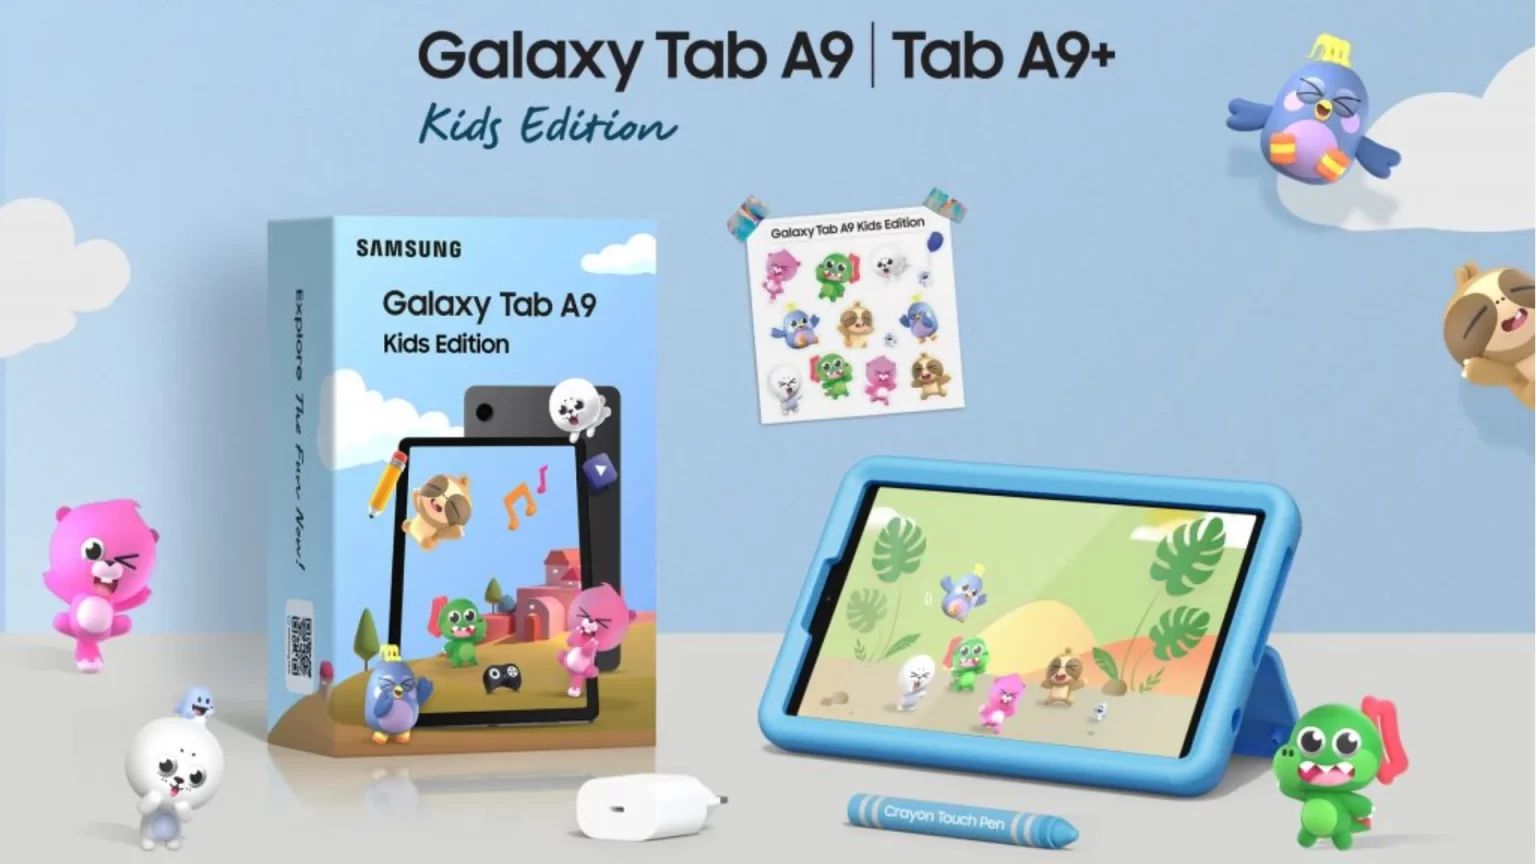 Galaxy Tab A9 Kids Edition: Features